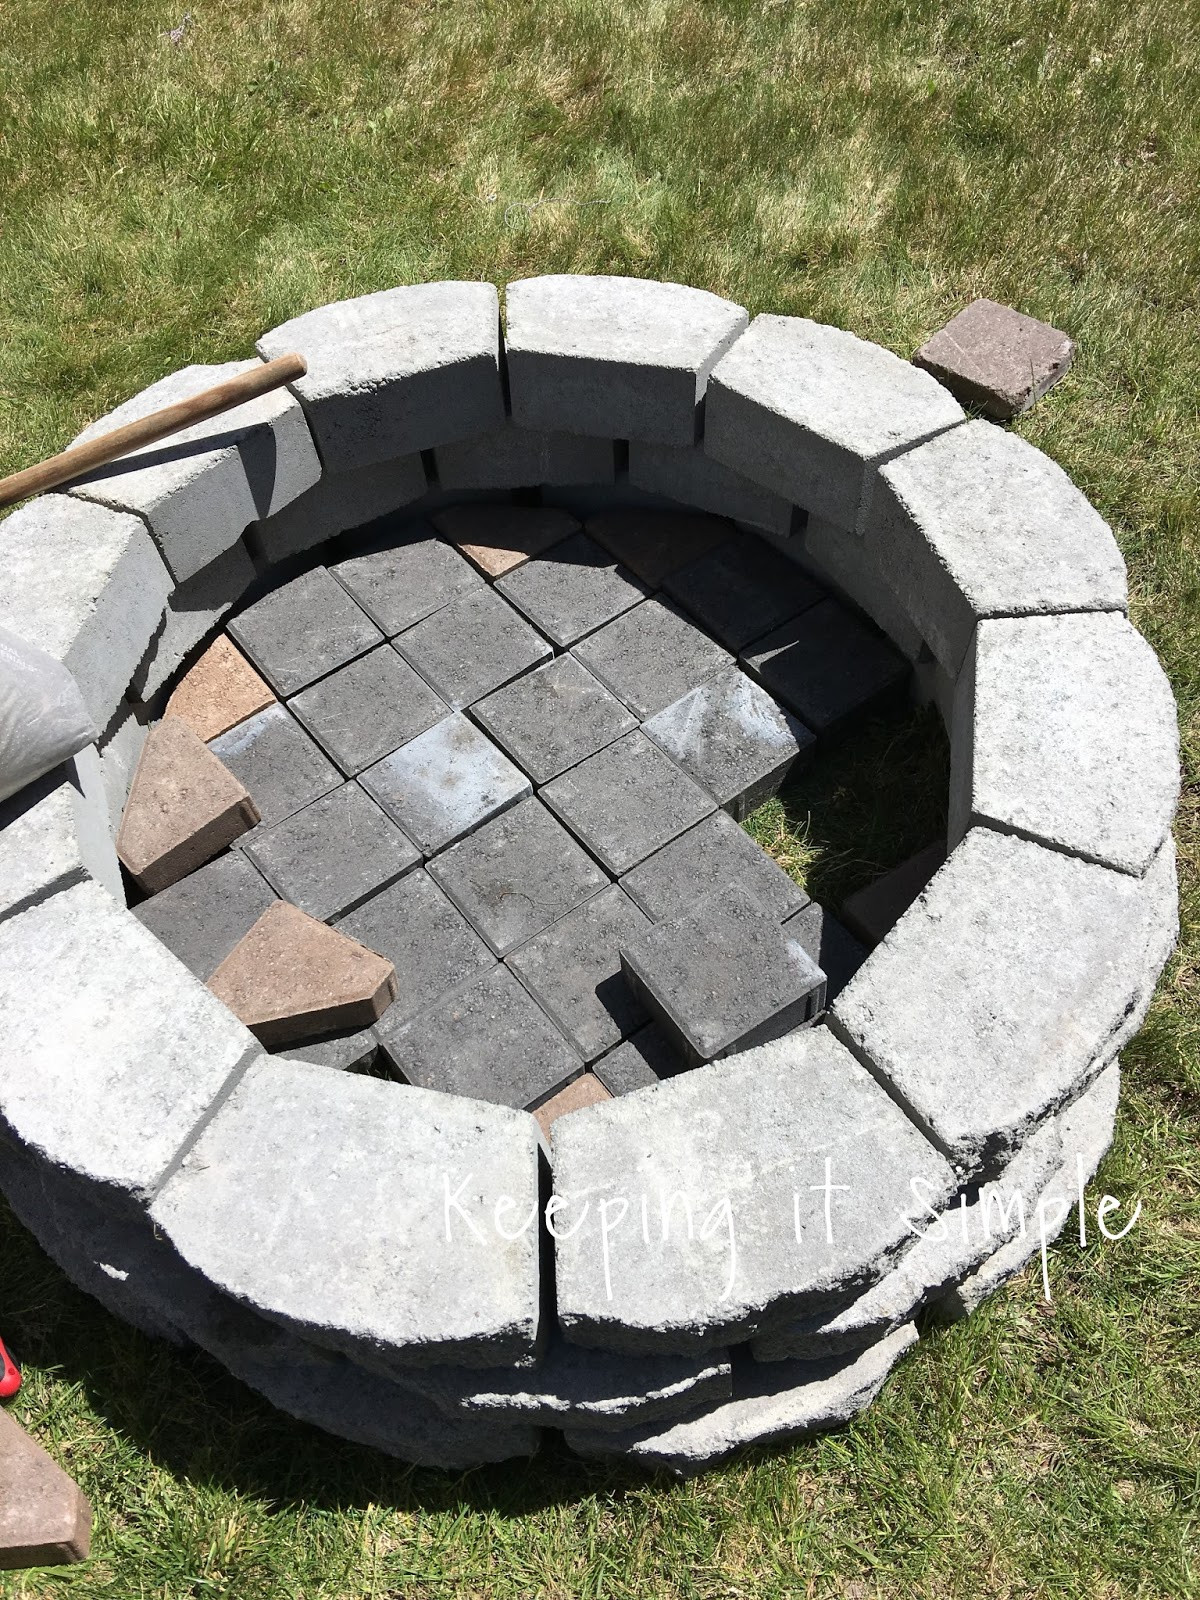 Building A Backyard Firepit
 How to Build a DIY Fire Pit for ly $60 • Keeping it